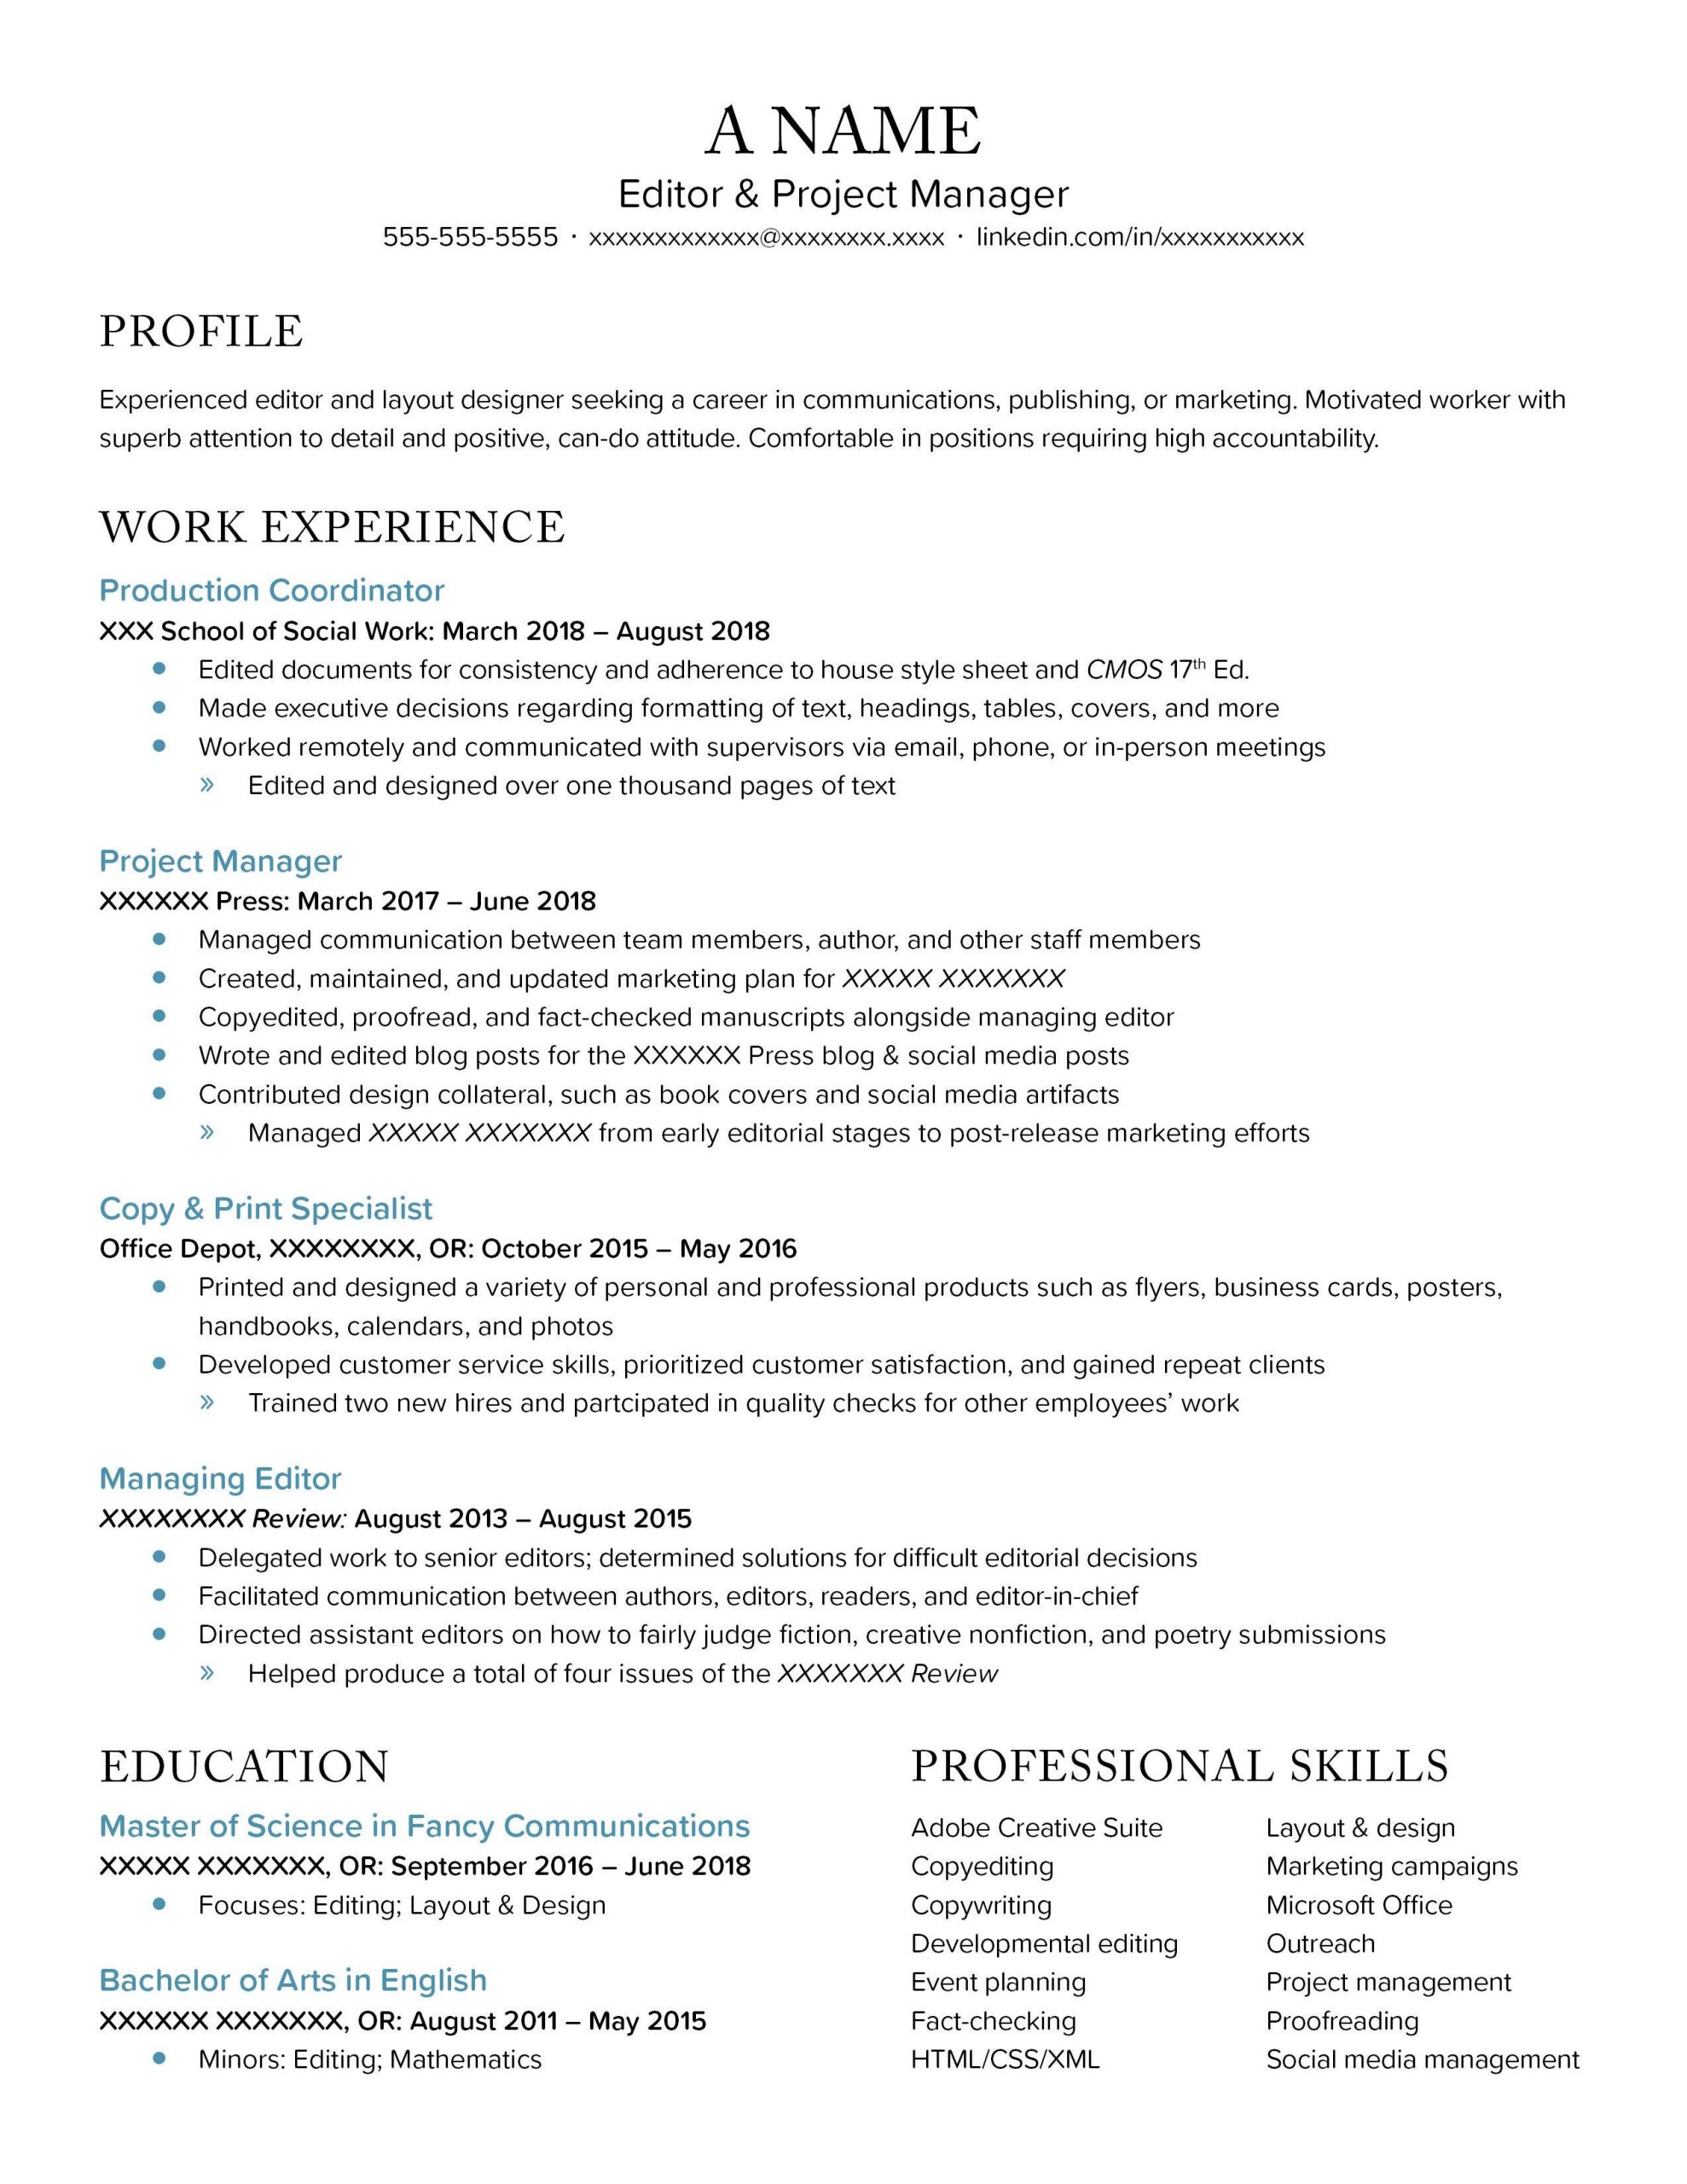 Sample Resume for Master Degree Application Recently Graduated with My Master S Degree Resume isn T